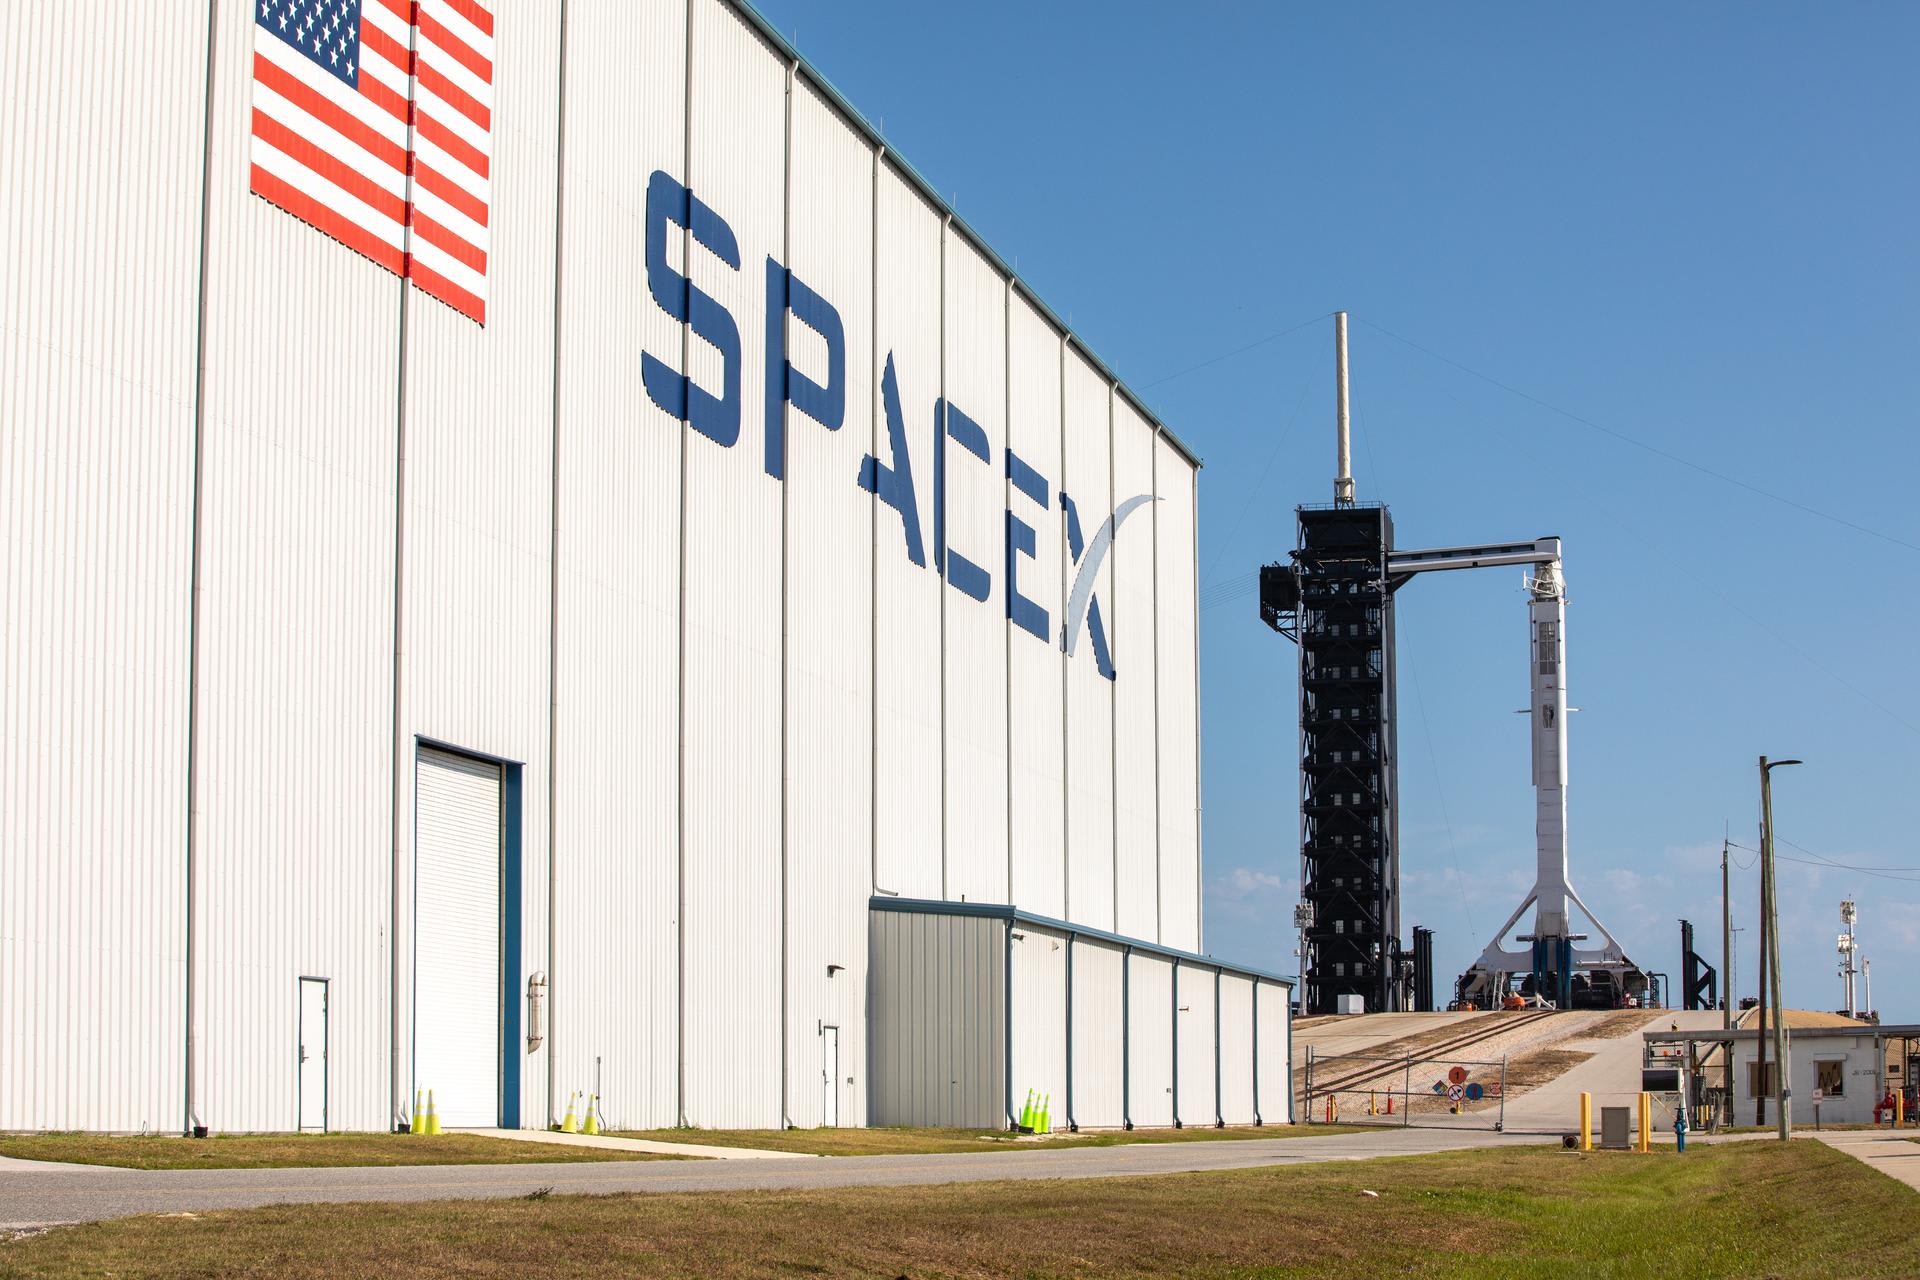 SpaceX raised greater than it sought in first 2020 funding spherical